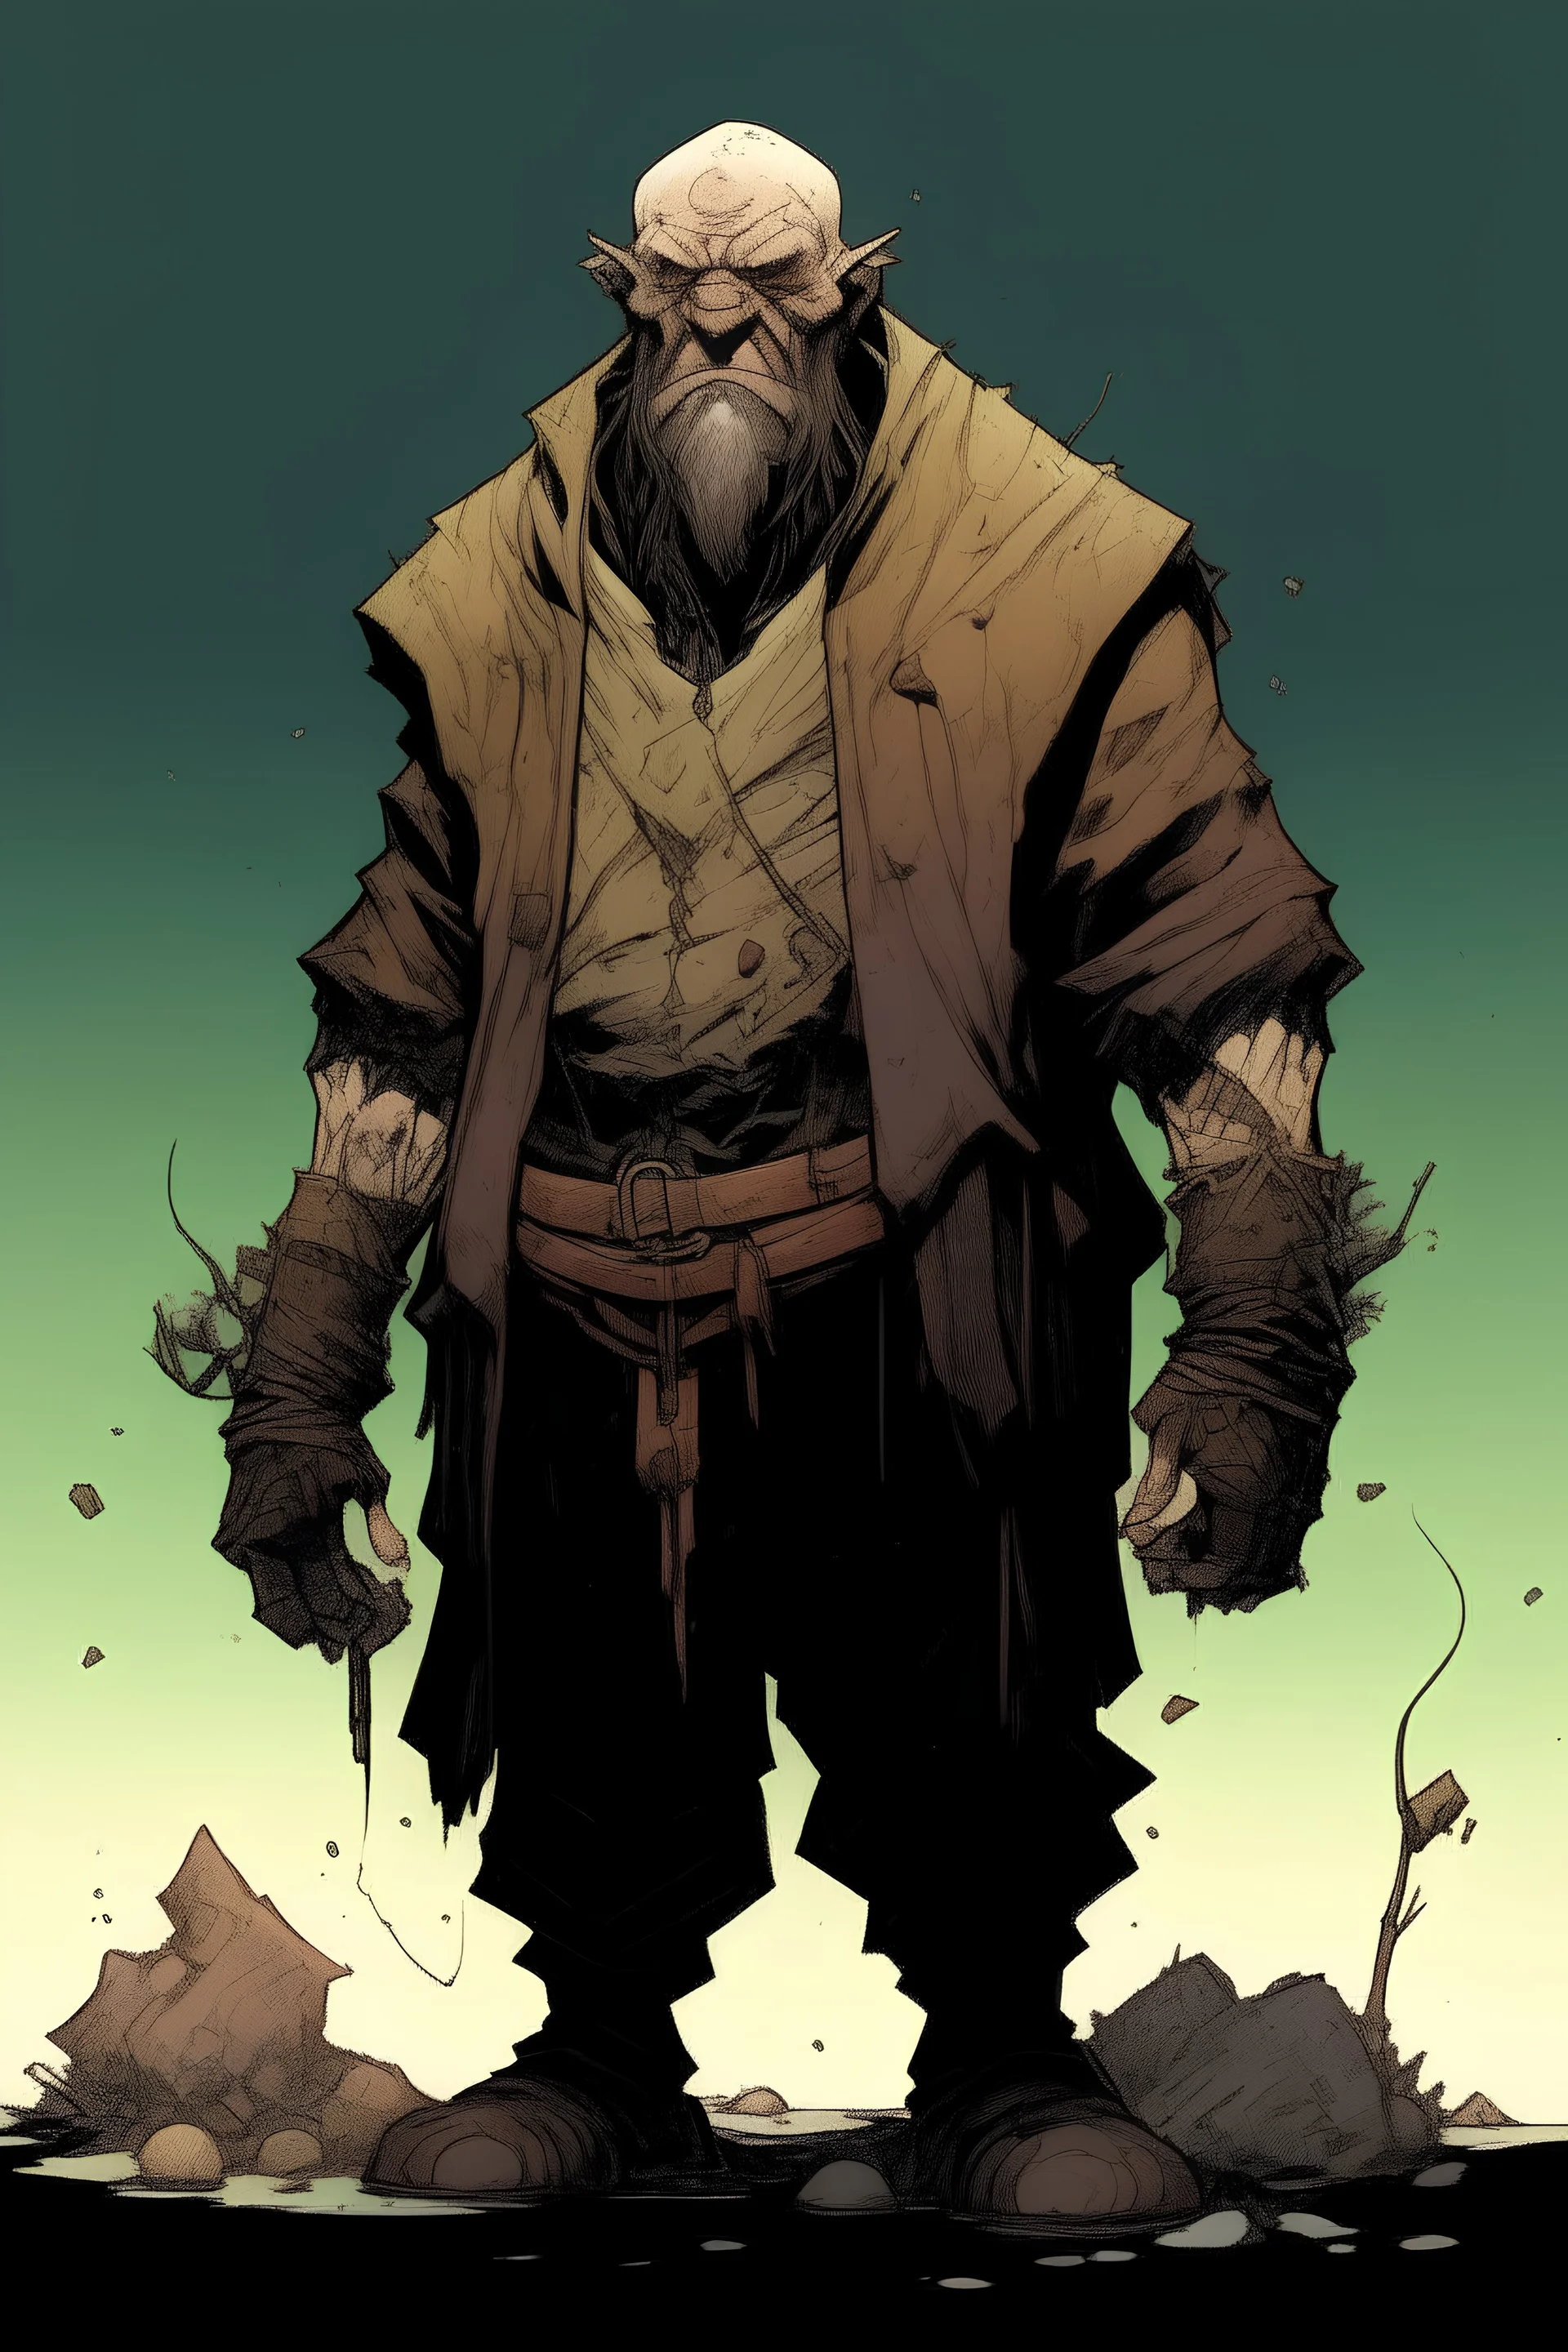 highly detailed character concept, full body illustration of a hardened, dwarf, finely defined but decayed facial features, necrotic skin, in the comic book art style of Mike Mignola, Bill Sienkiewicz and Jean Giraud Moebius, , highly detailed, grainy, gritty textures, , dramatic natural lighting